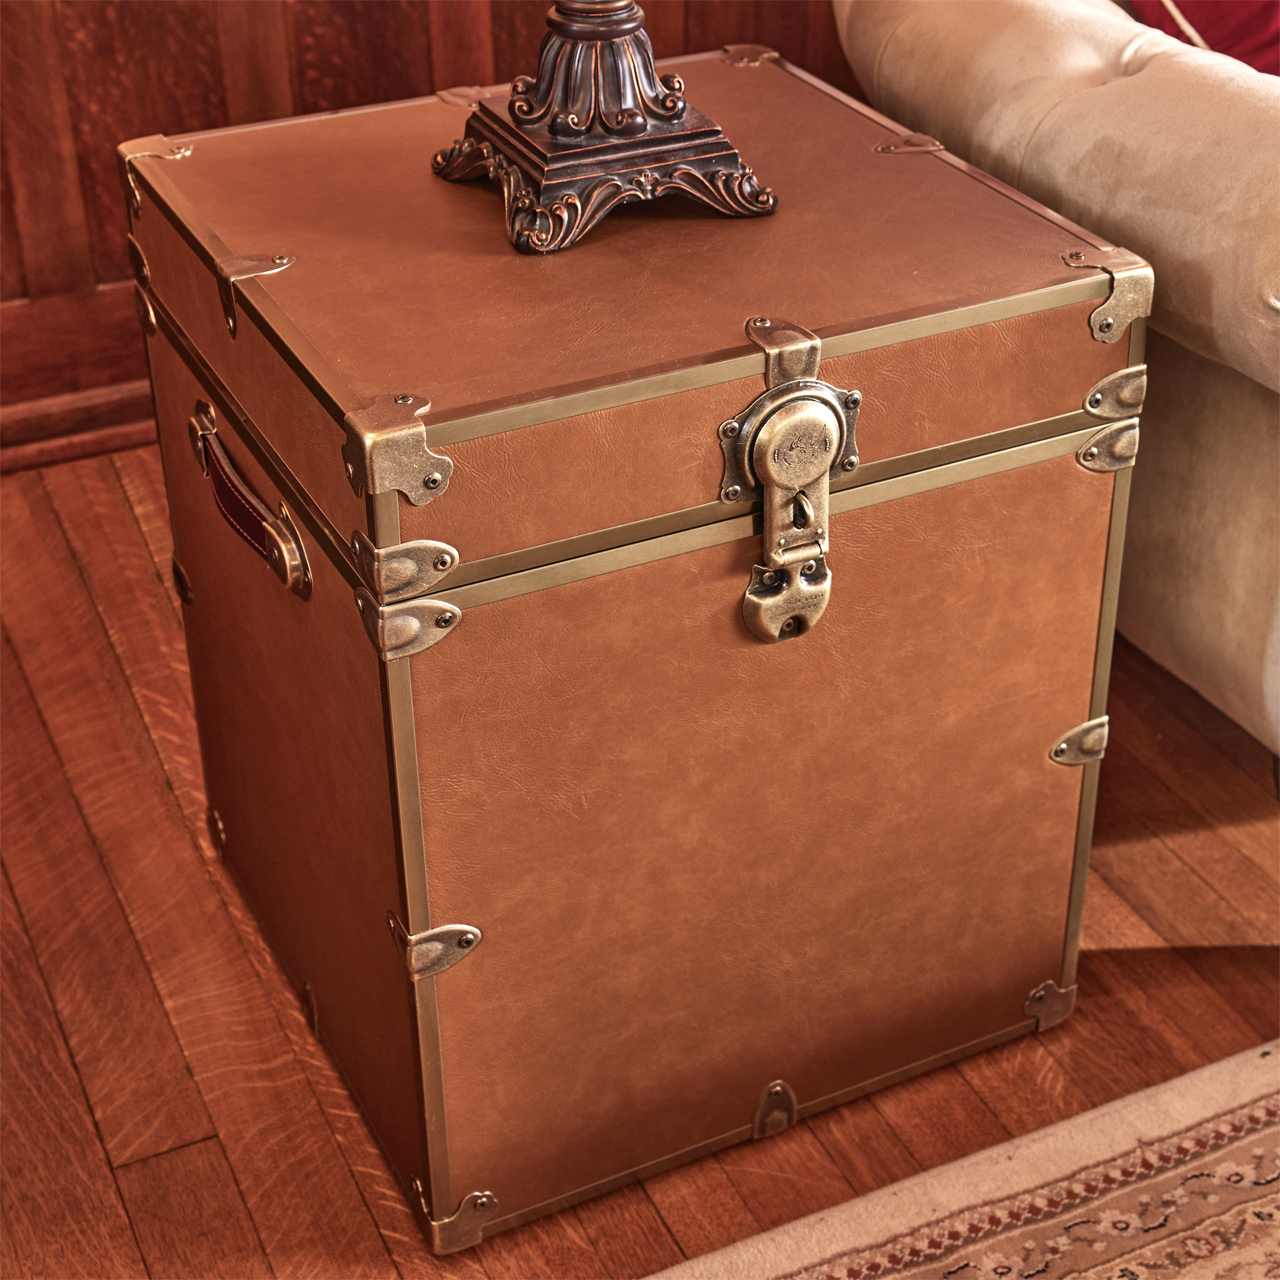 Rhino Luxury Faux Leather Coffee Table Trunk With Feet